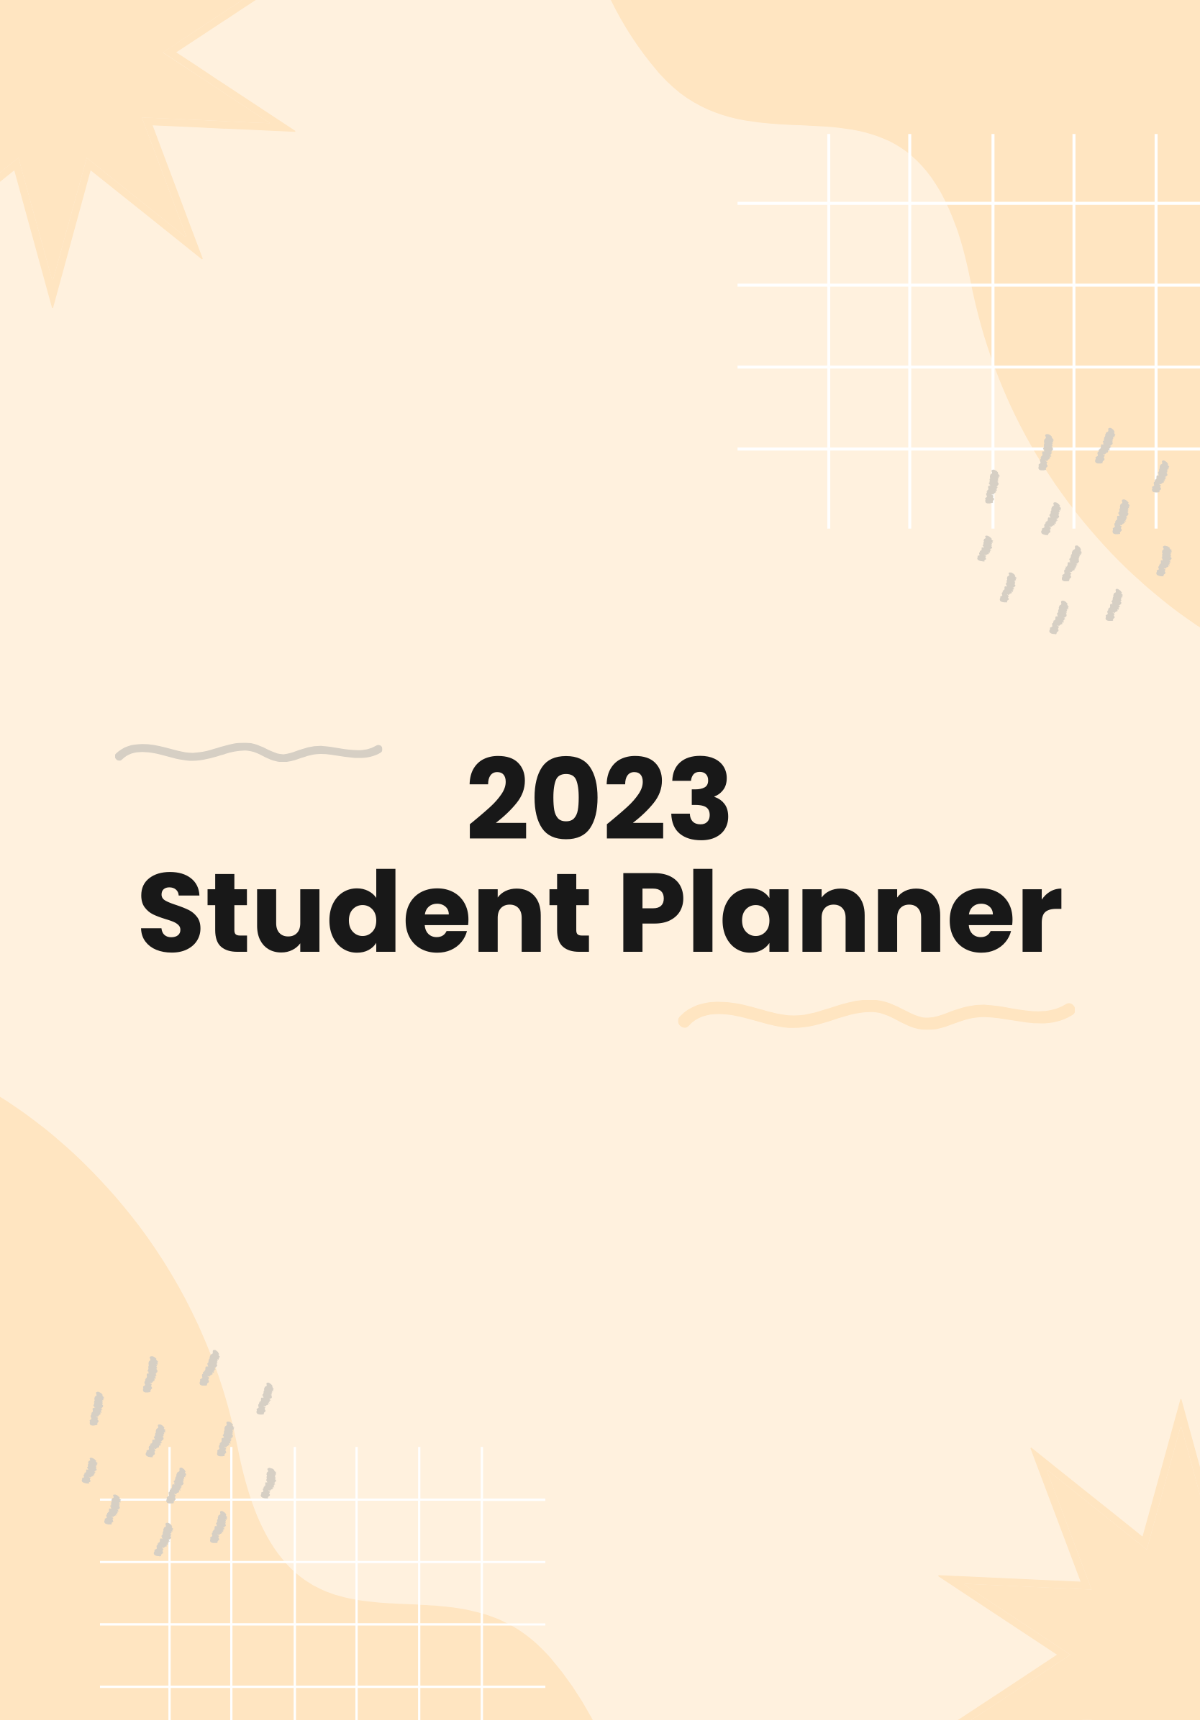 2023 Student Planner Template